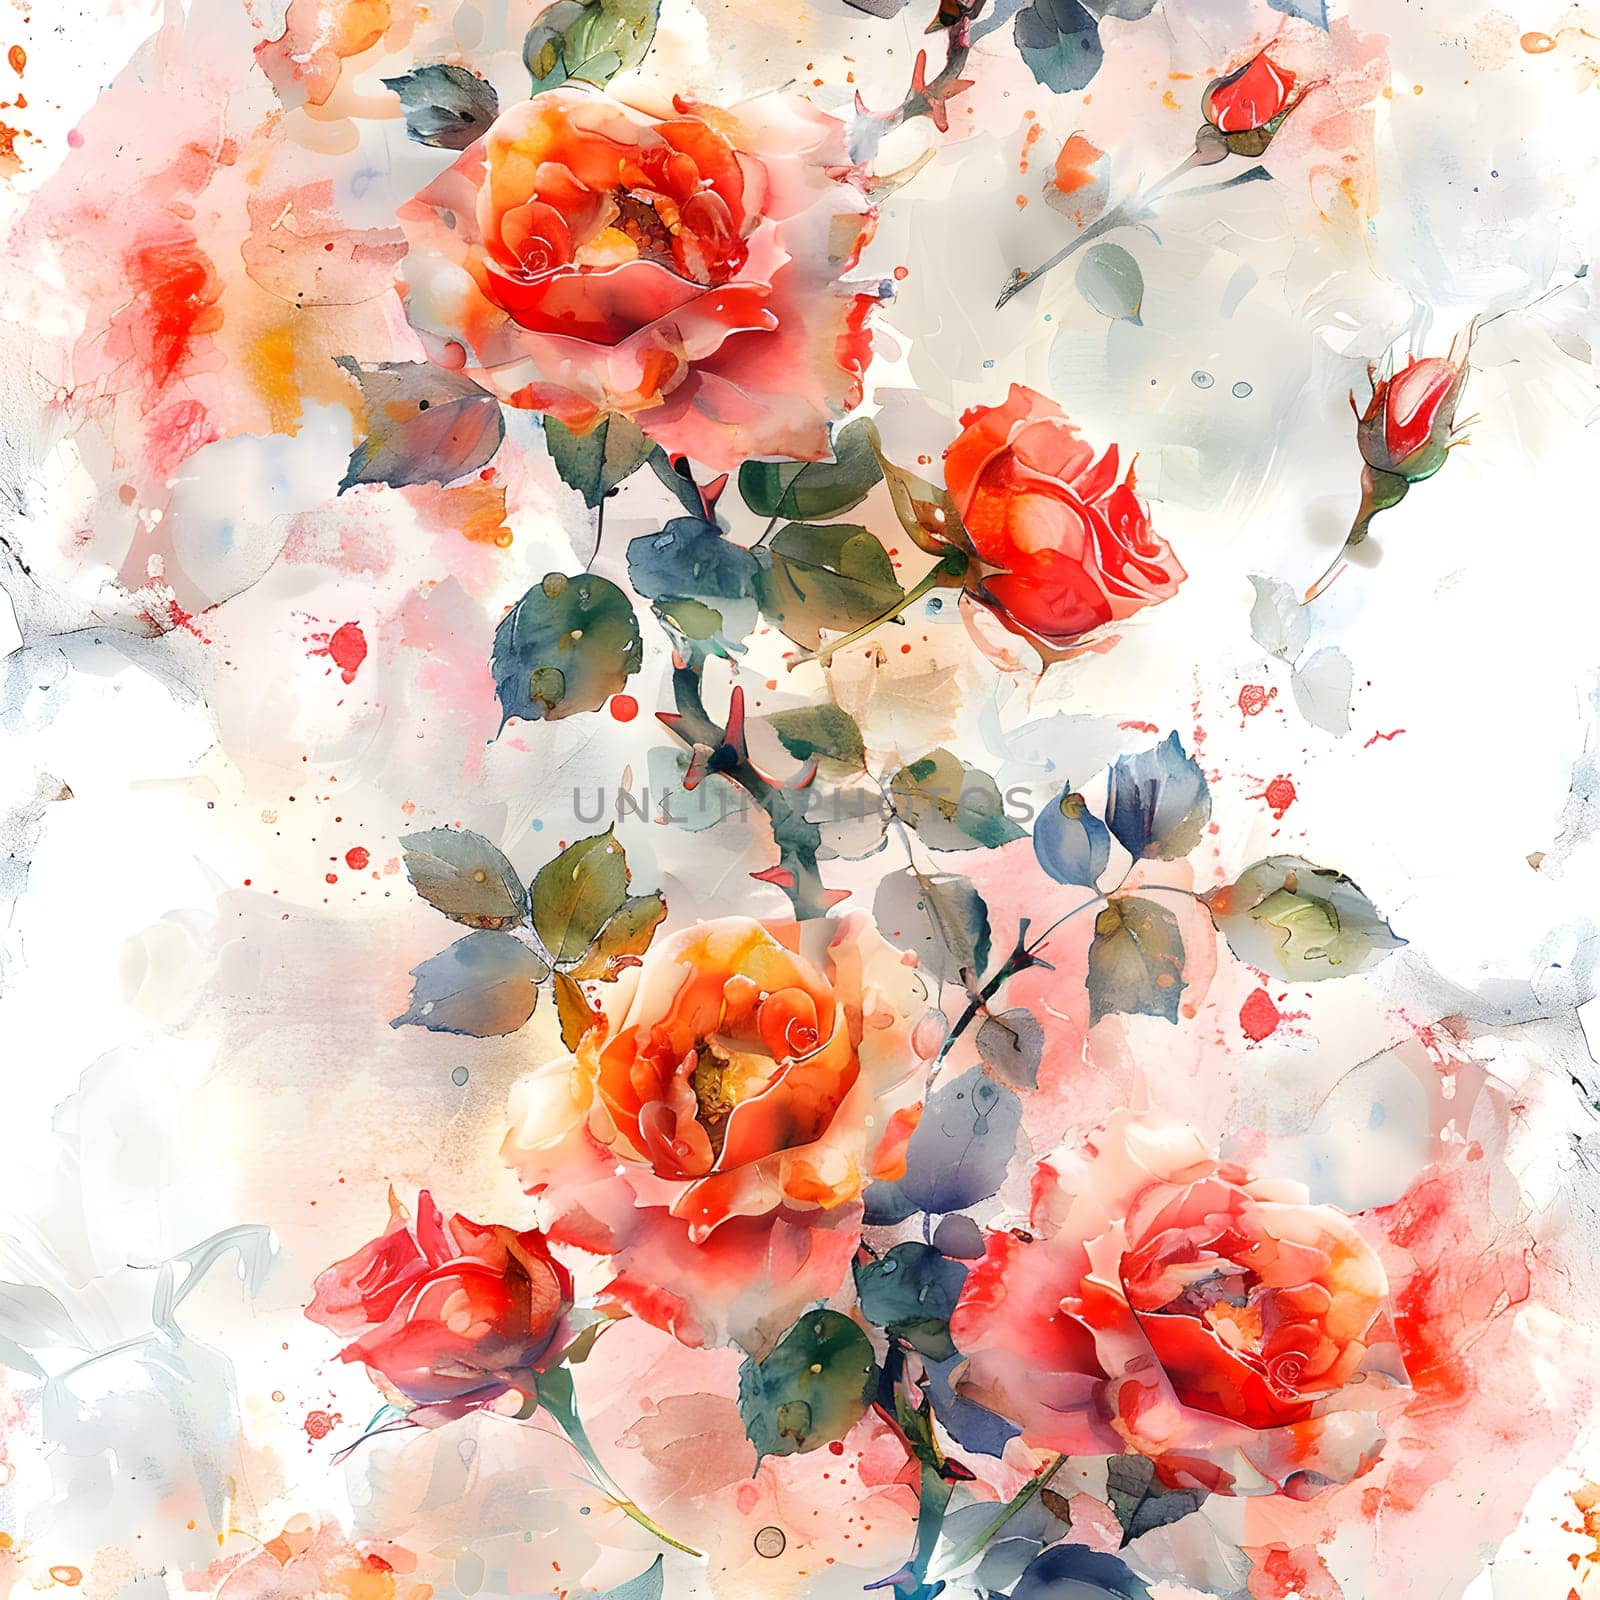 Watercolor painting of red hybrid tea roses on white background by Nadtochiy